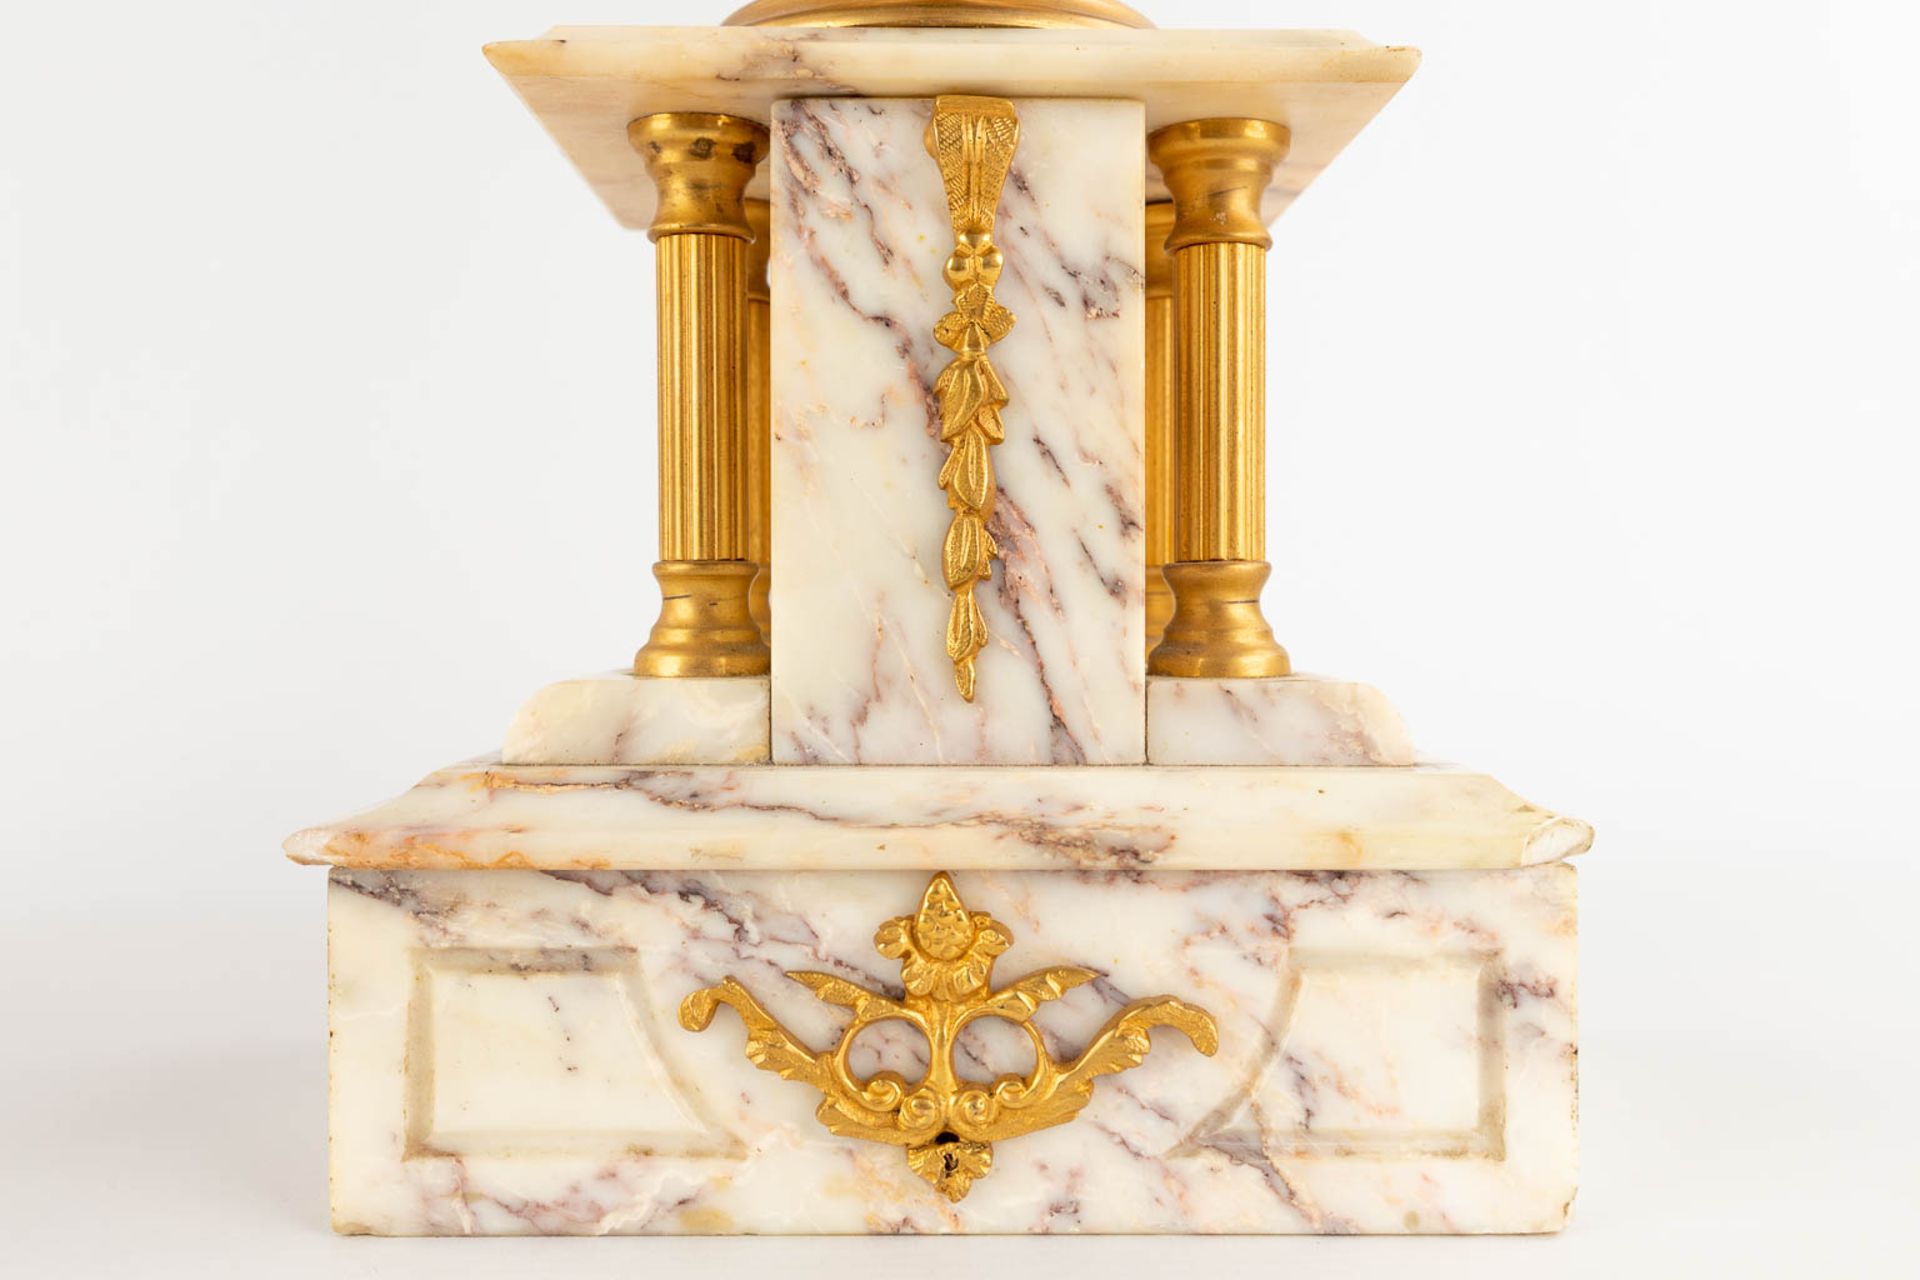 Ferdinand BARBEDIENNE (1810-1892) 'Neoclassical Cassolettes' gilt bronze on marble. (D:12 x W:18 x H - Image 17 of 18